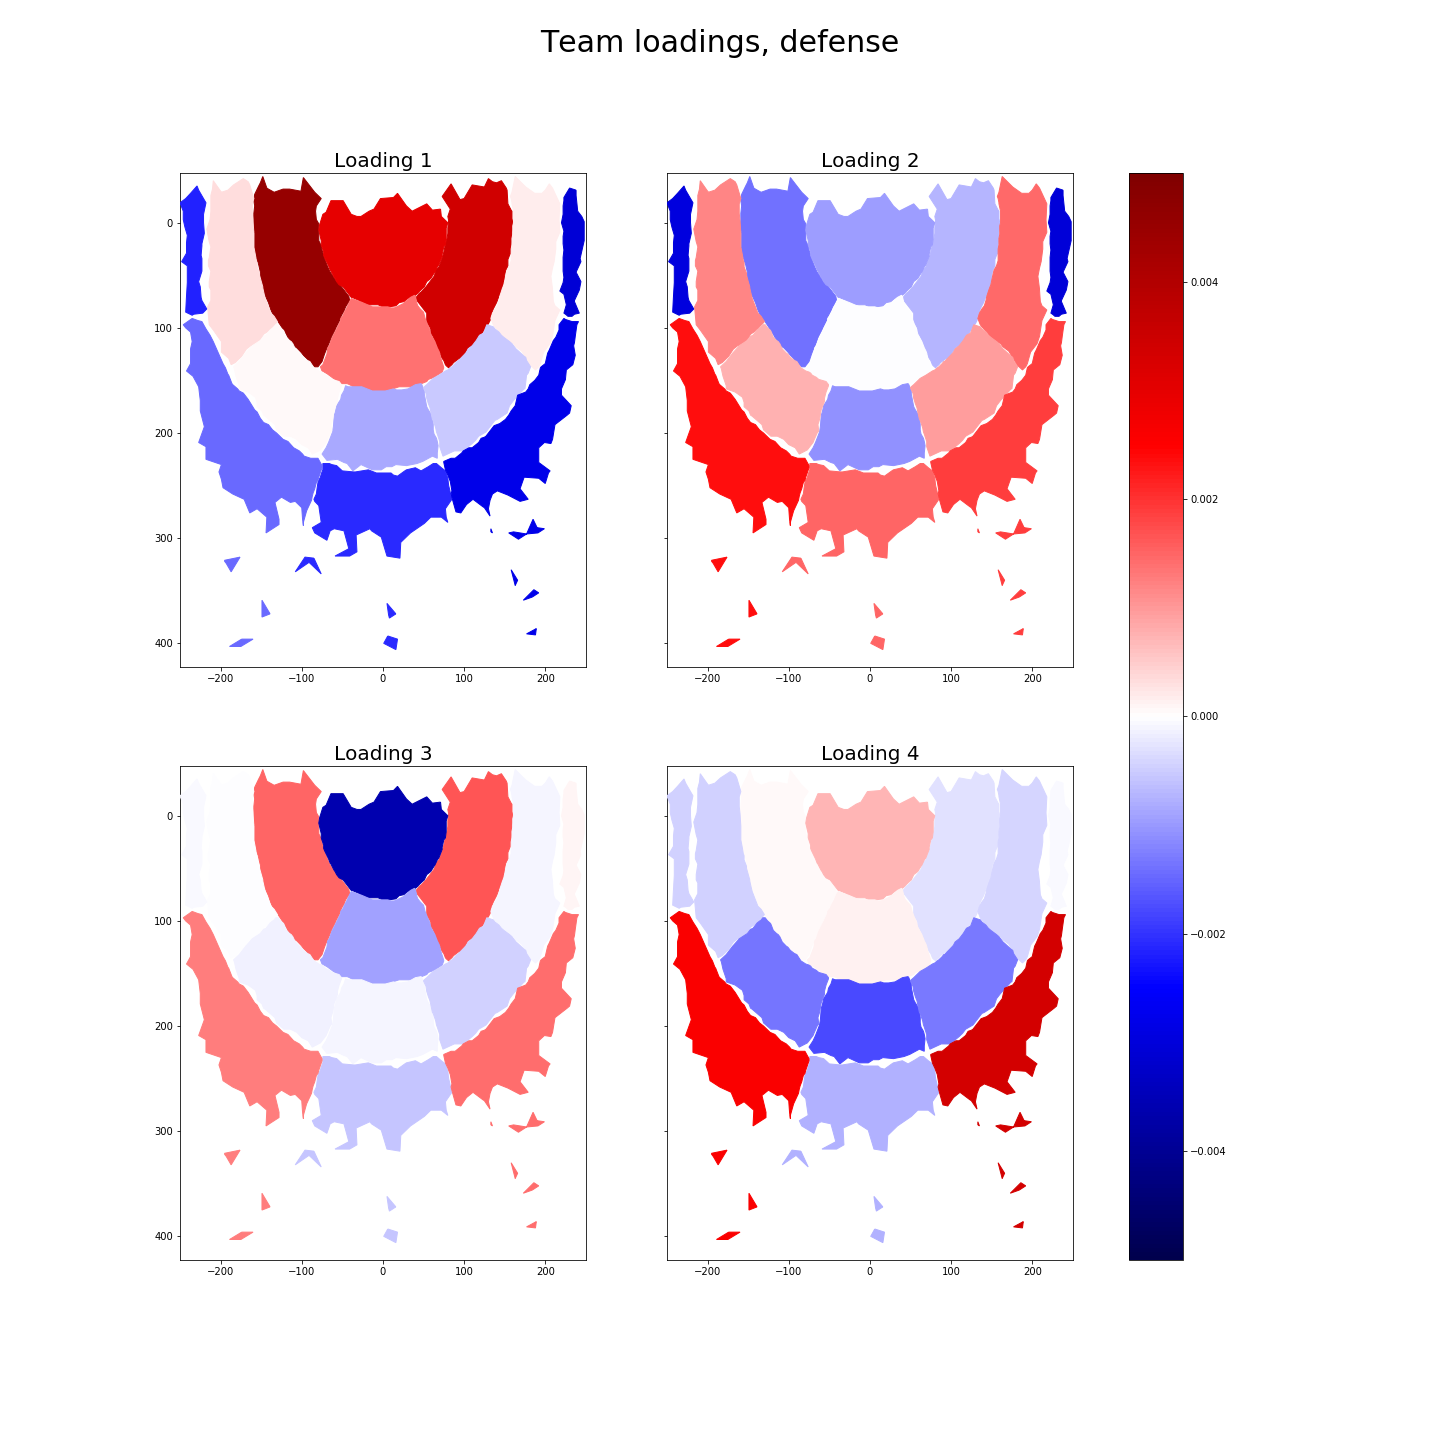 Plot of loadings for teams on defense